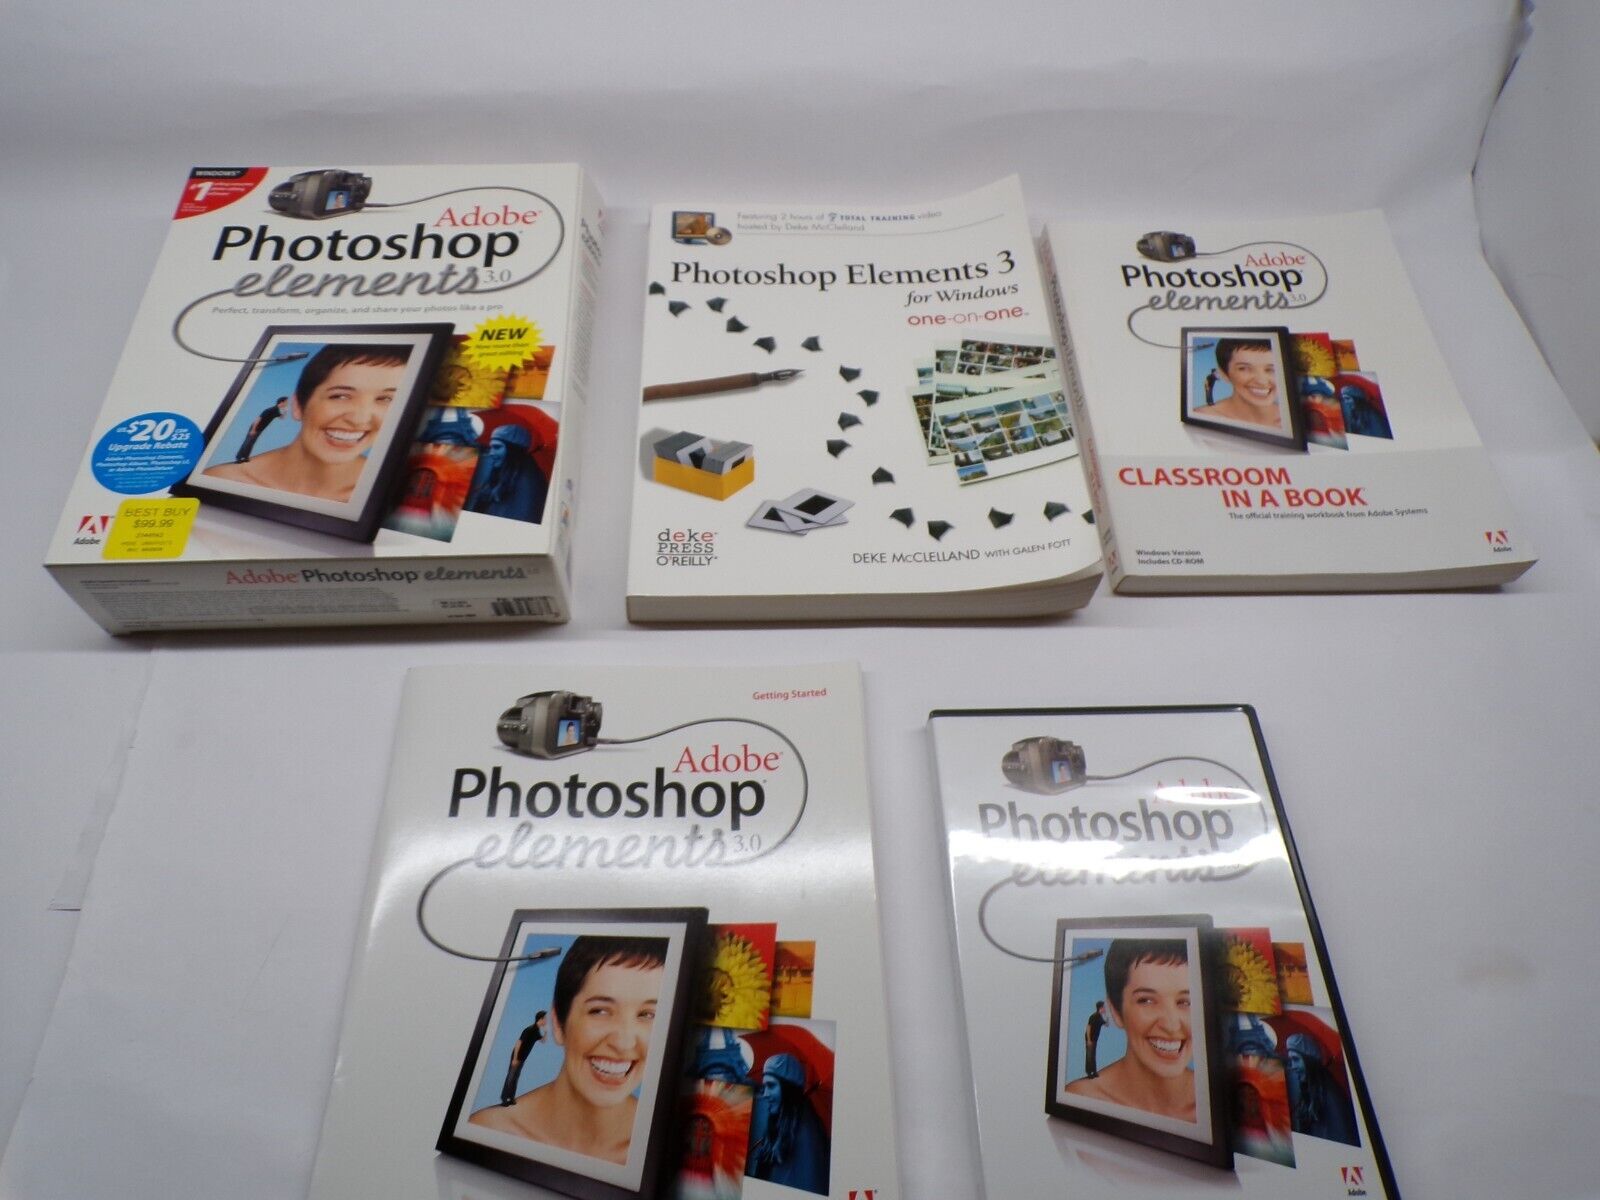 Adobe Photoshop Elements 3.0 Training One on One Classroom in a Book Lot of 3